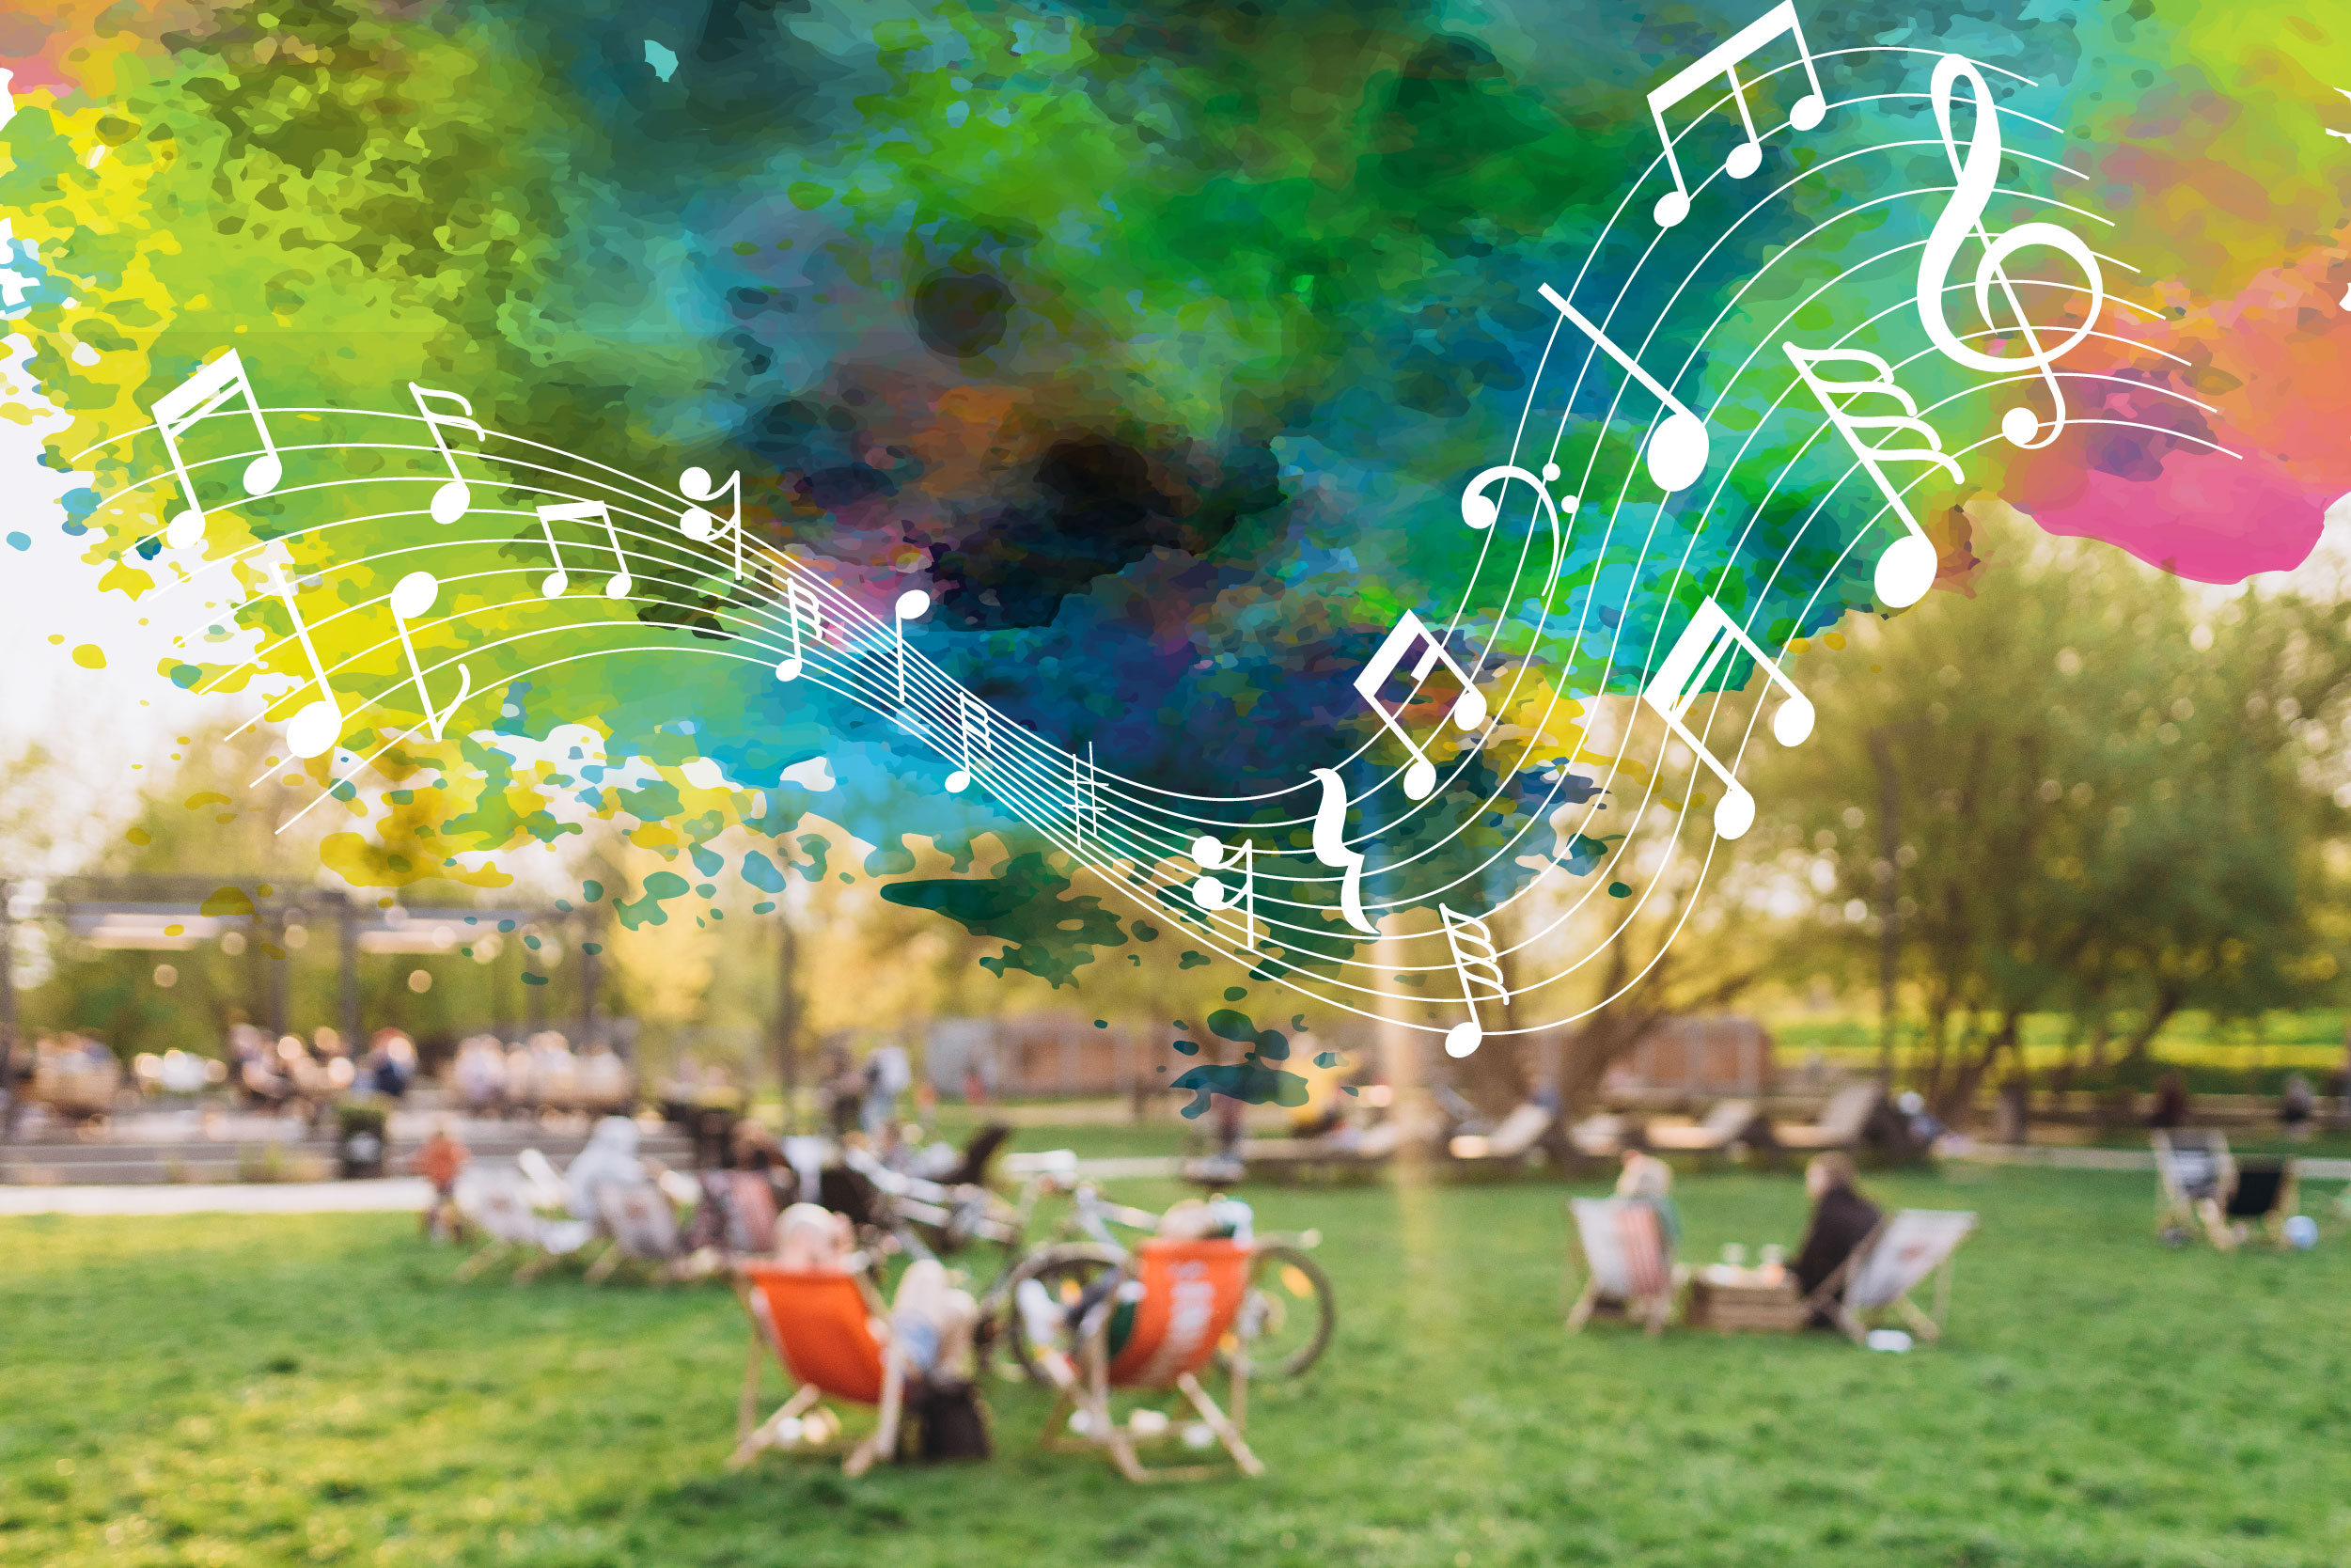 Group of individuals sitting in the grass with colorful music notes flowing in the sky.